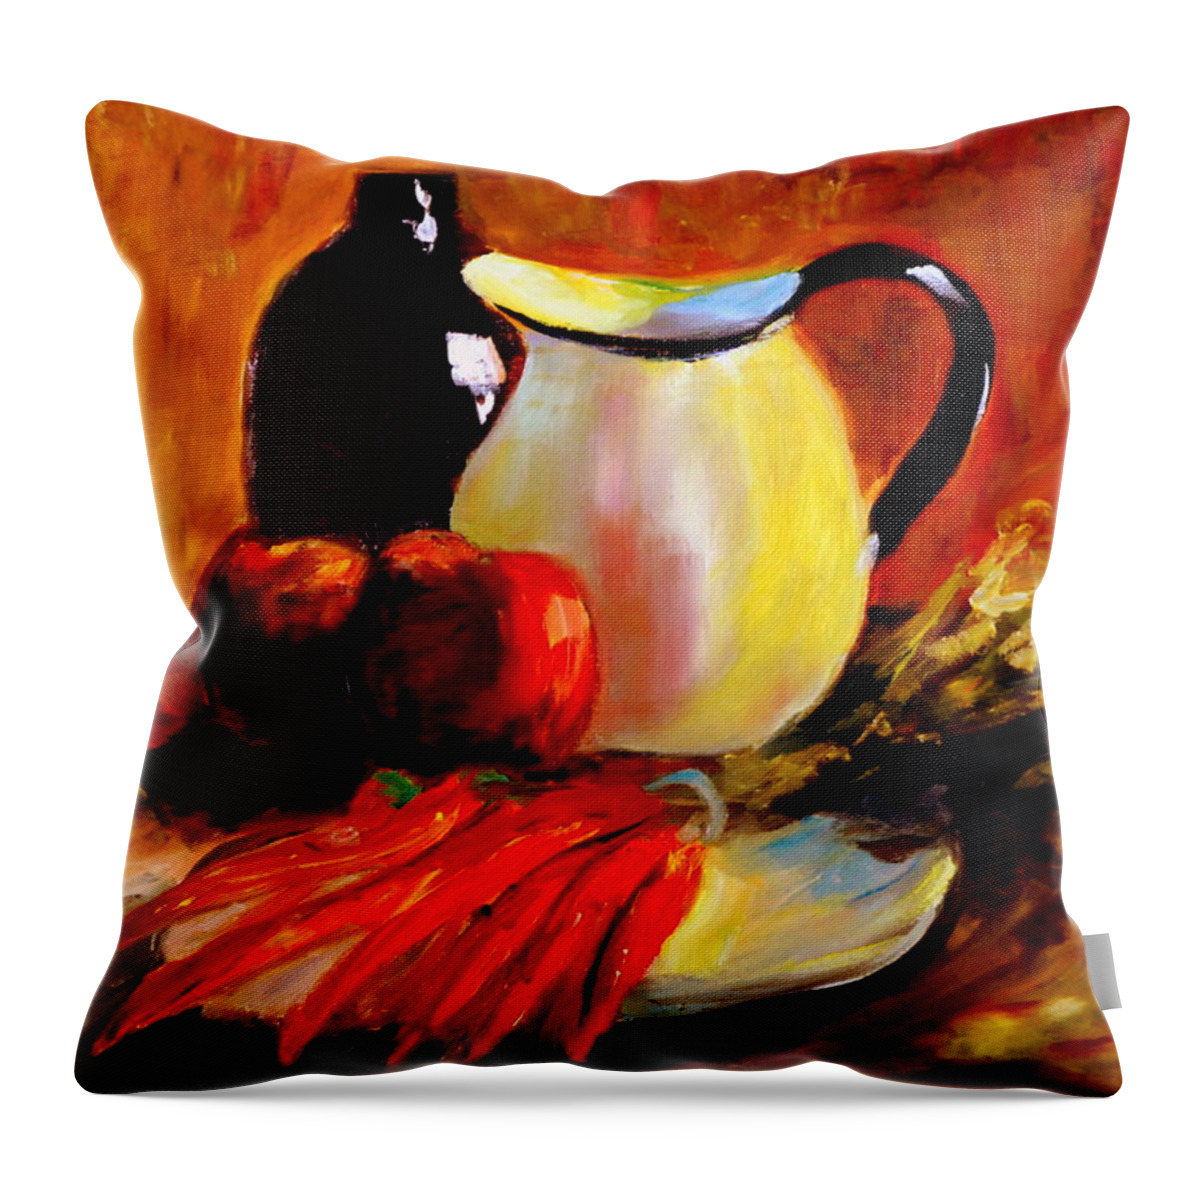 Still Life Throw Pillow featuring the painting Still Life by Phil Burton